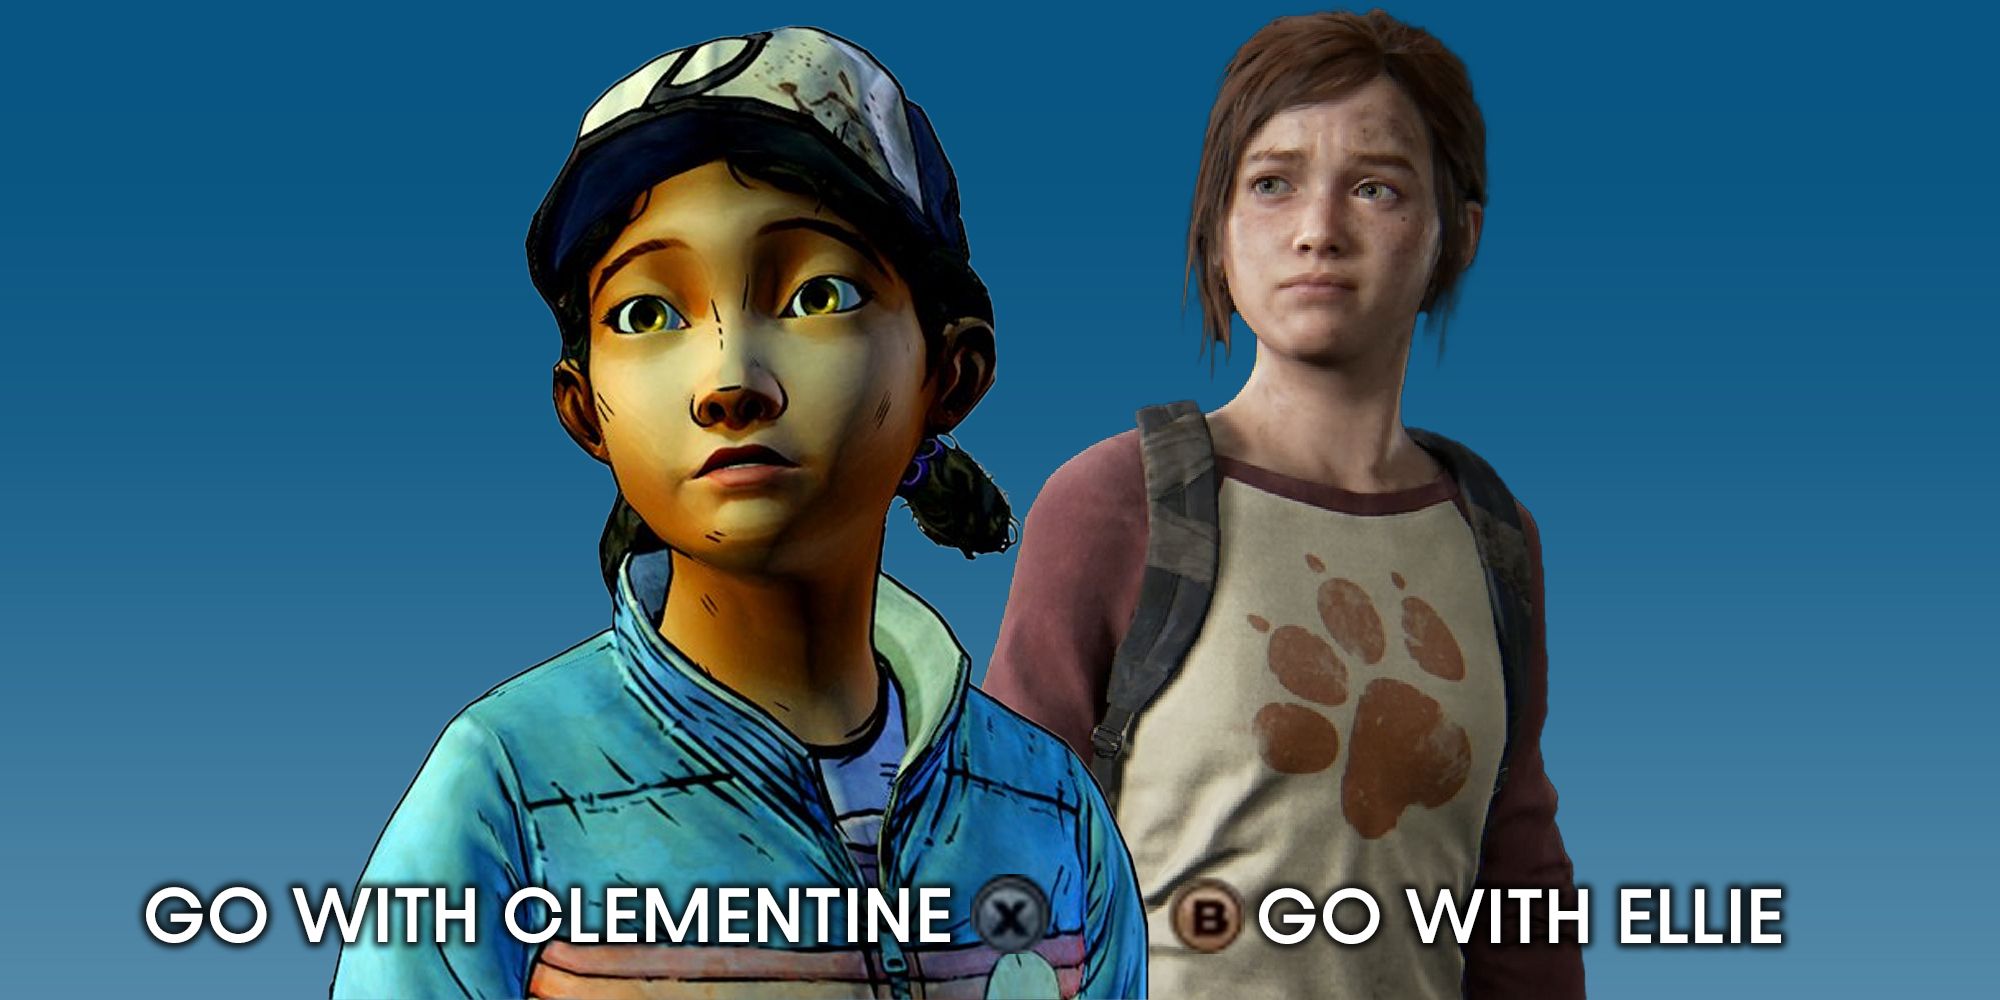 Gamers Are Pitting The Last Of Us’ Ellie Against The Walking Dead’s Clementine